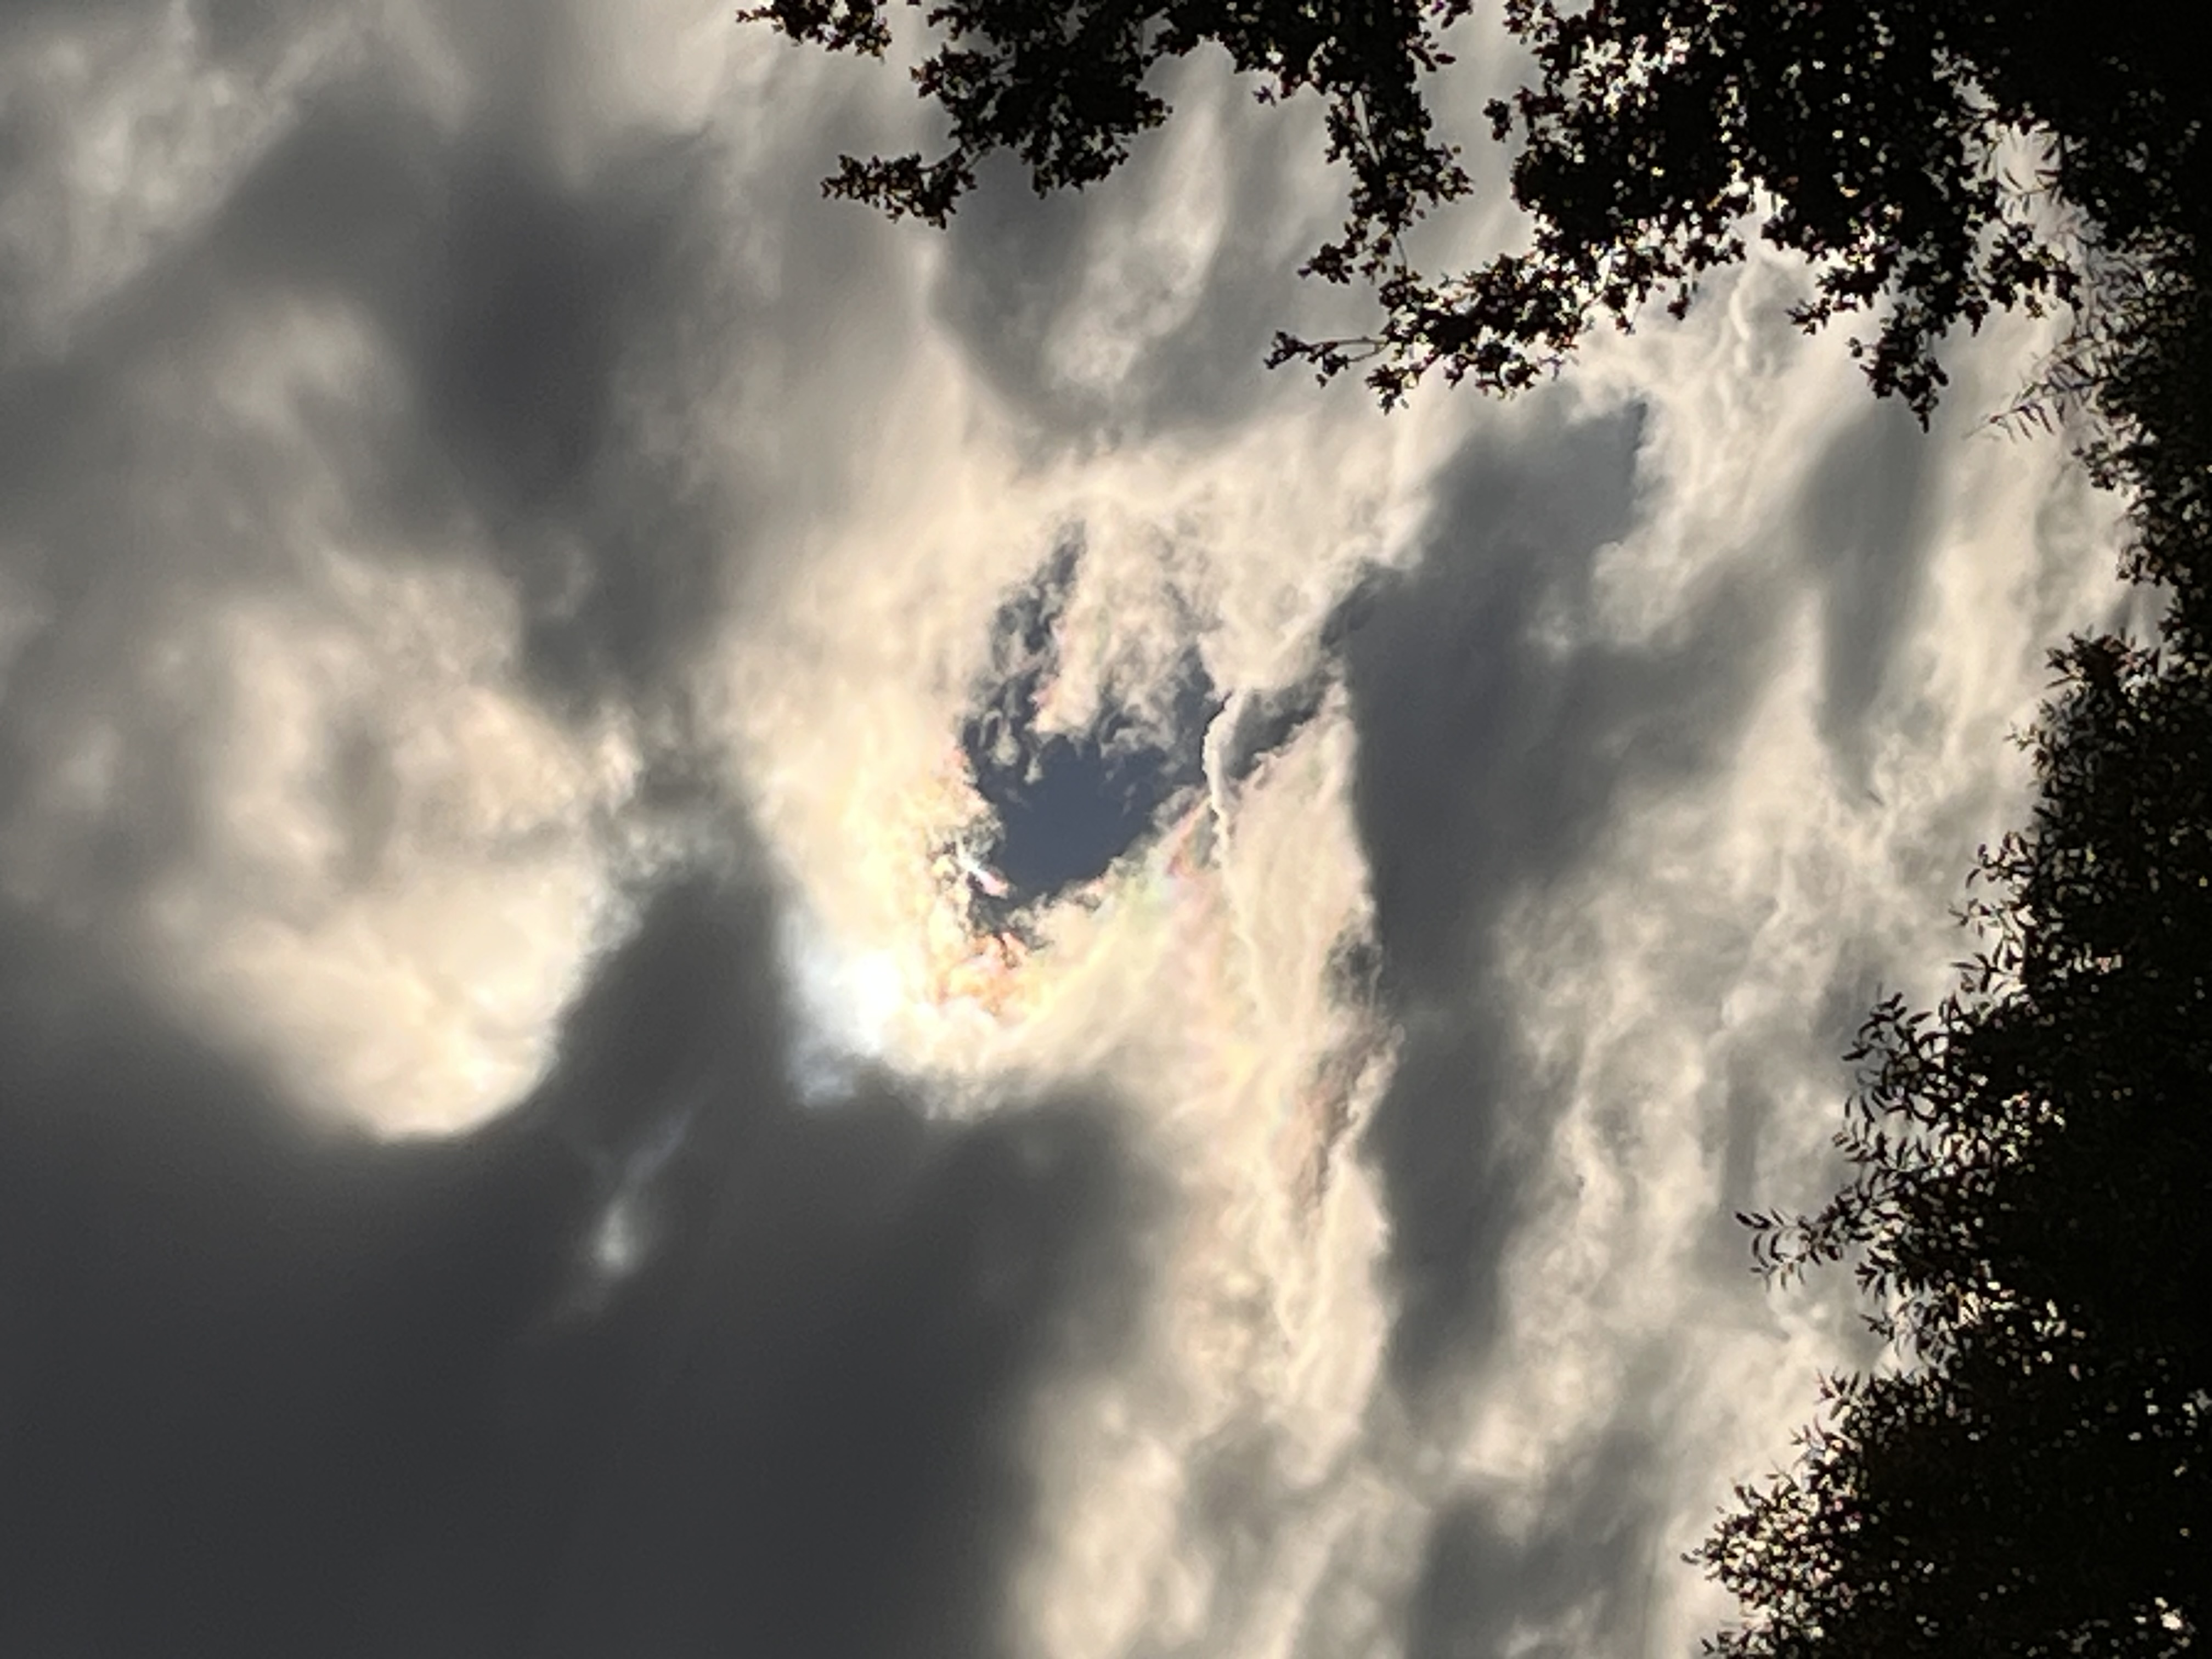 the eclipse covered up by the clouds. the clouds appear dark grey in the shade but there are less dense spots where they appear a light gold color.